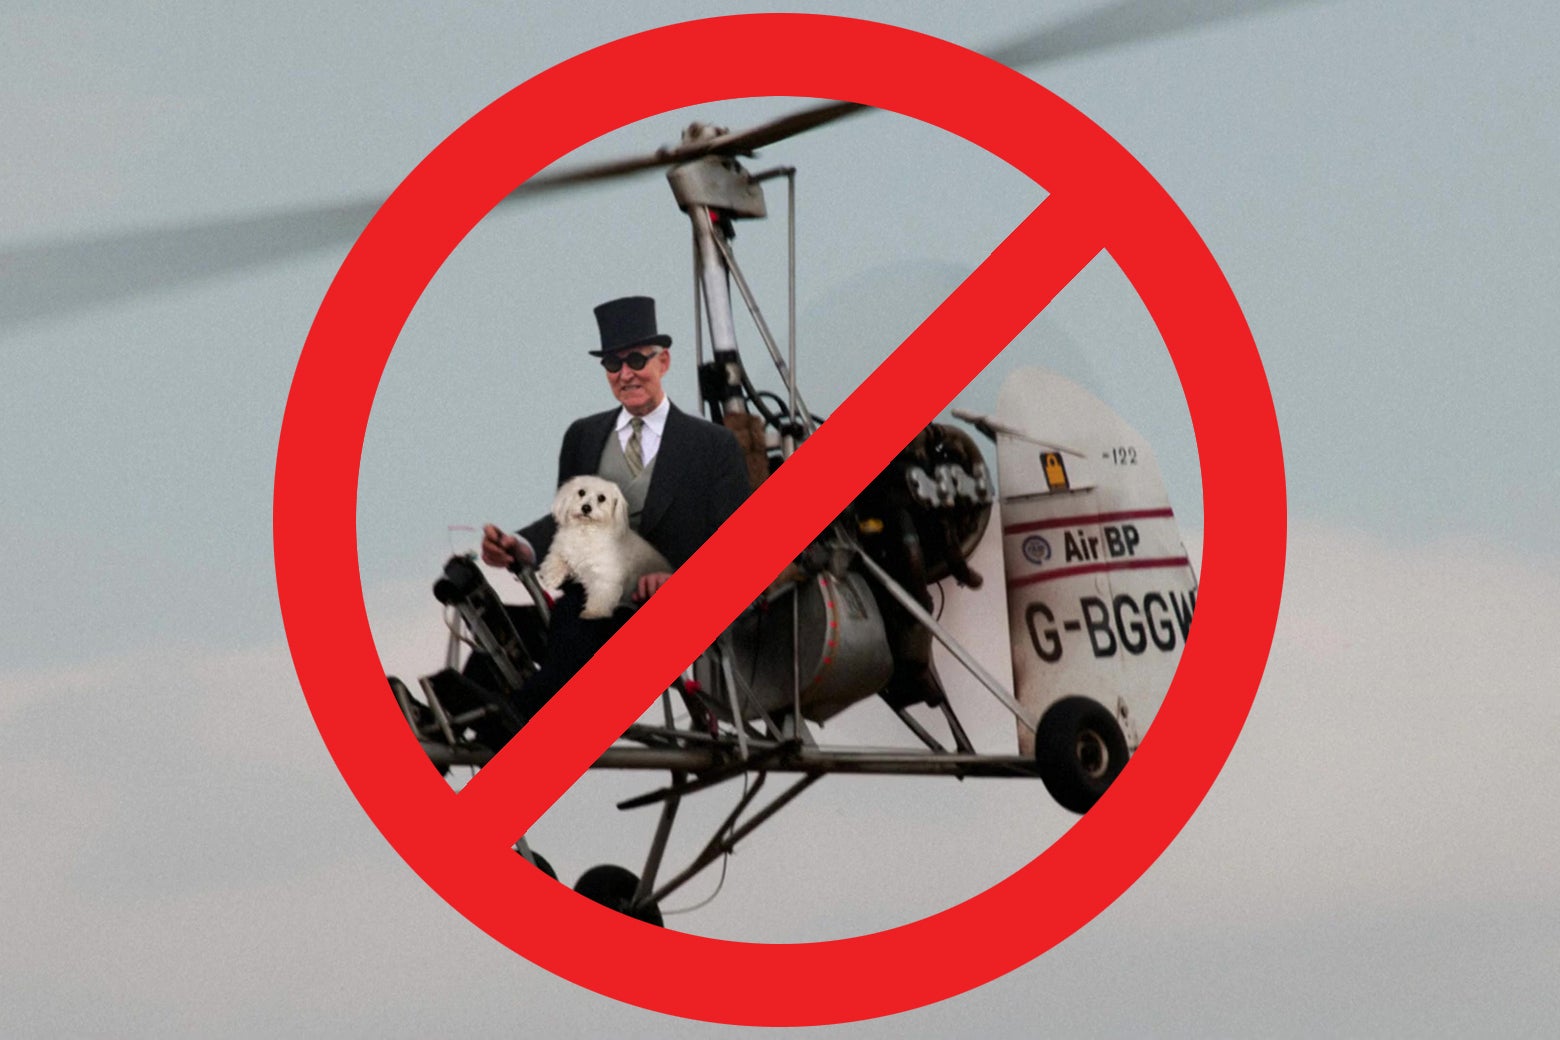 A photo of Roger Stone in an autogyro, with a big red circle and a slash through it superimposed.